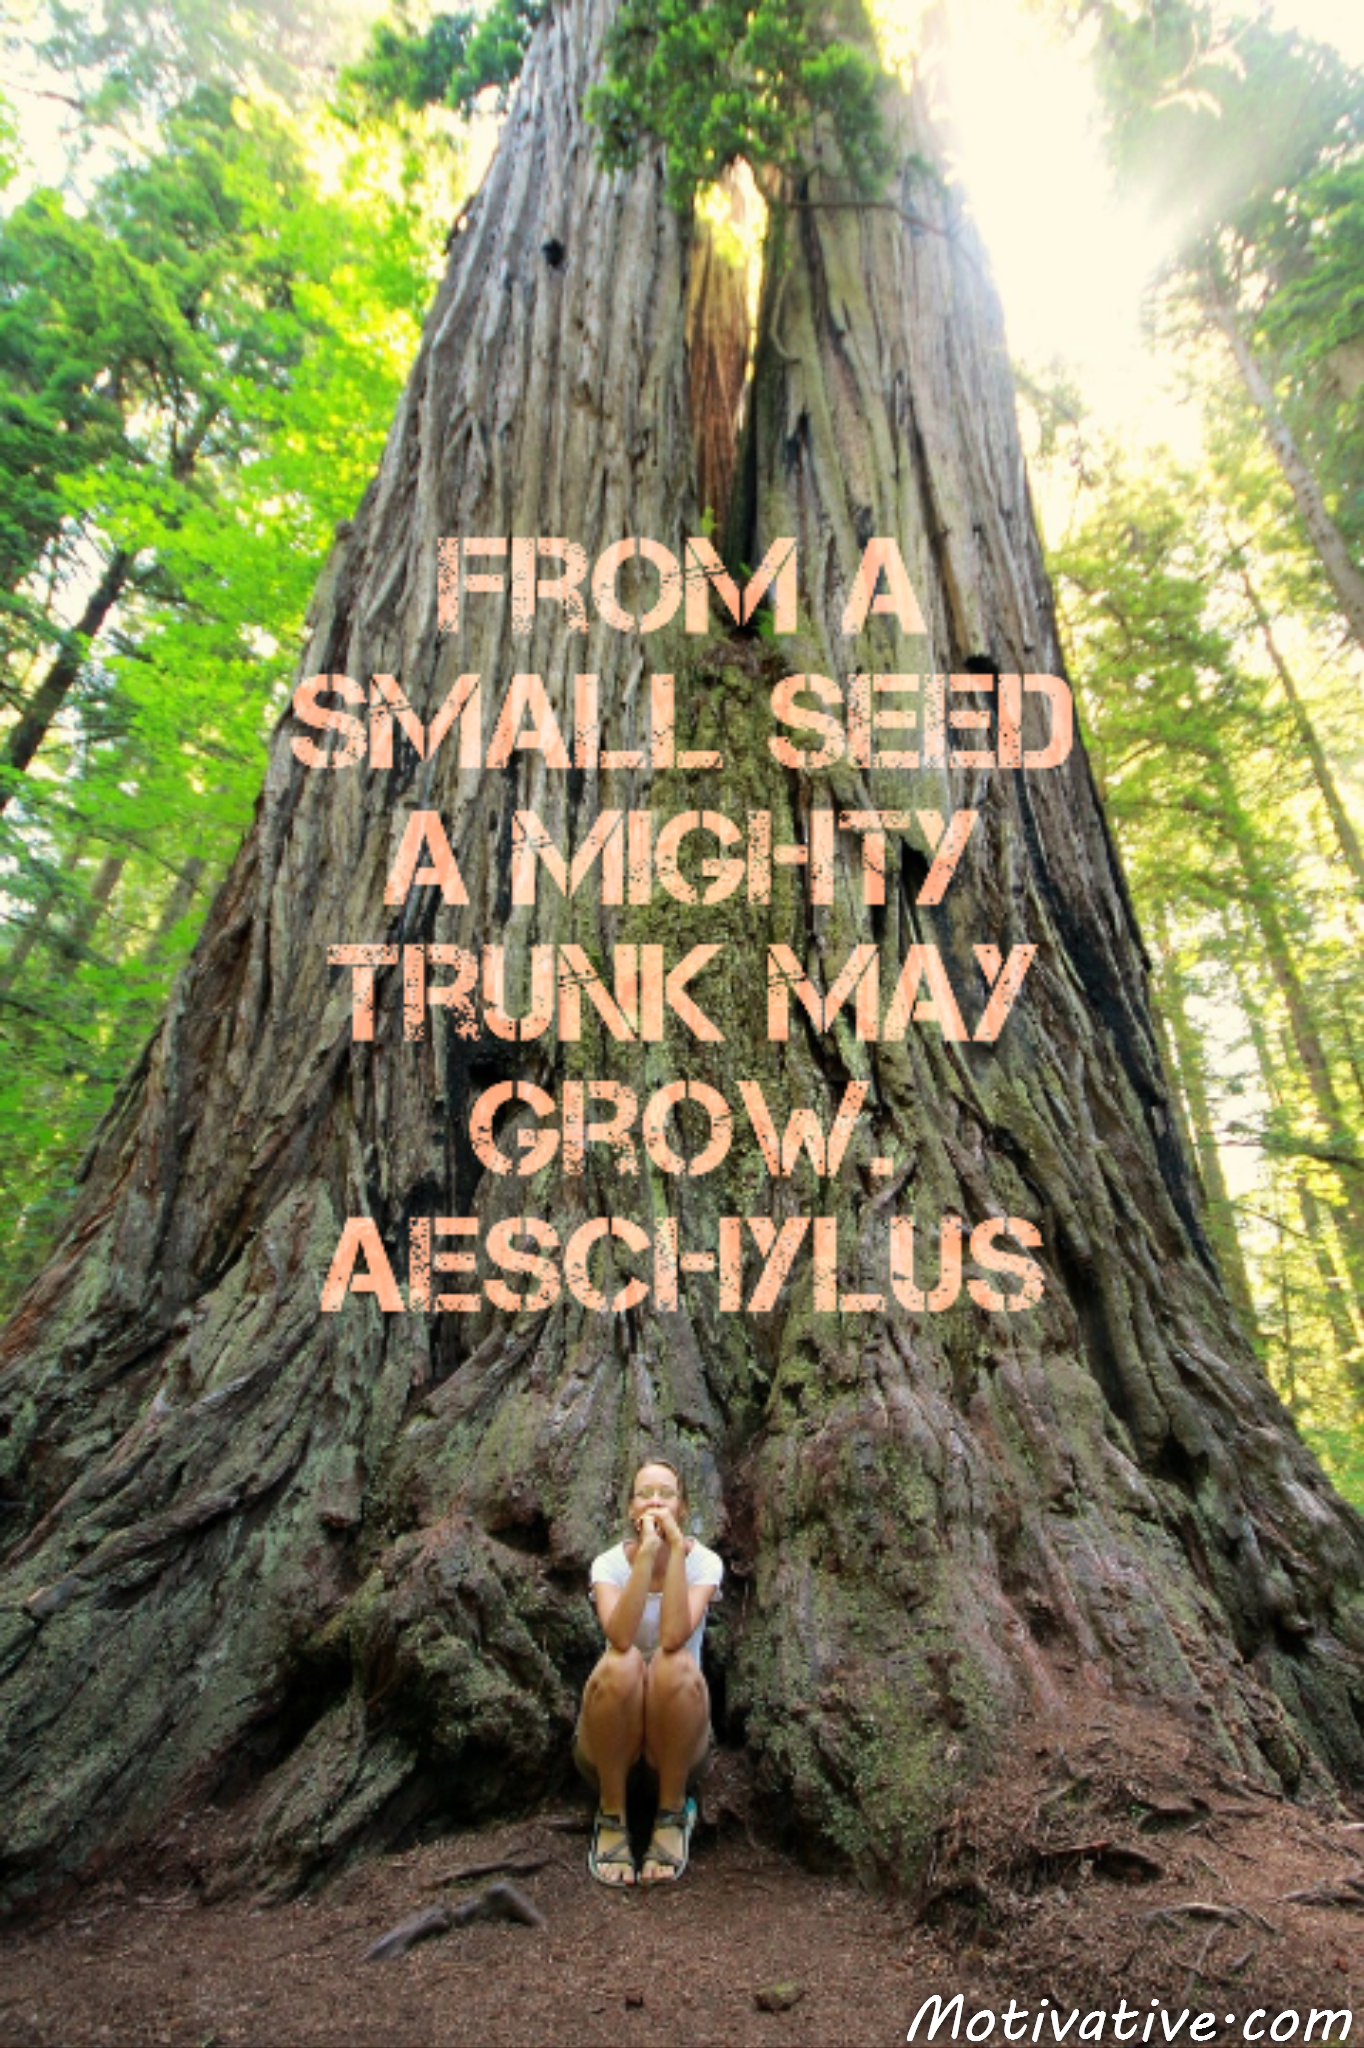 From a small seed a mighty trunk may grow. Aeschylus